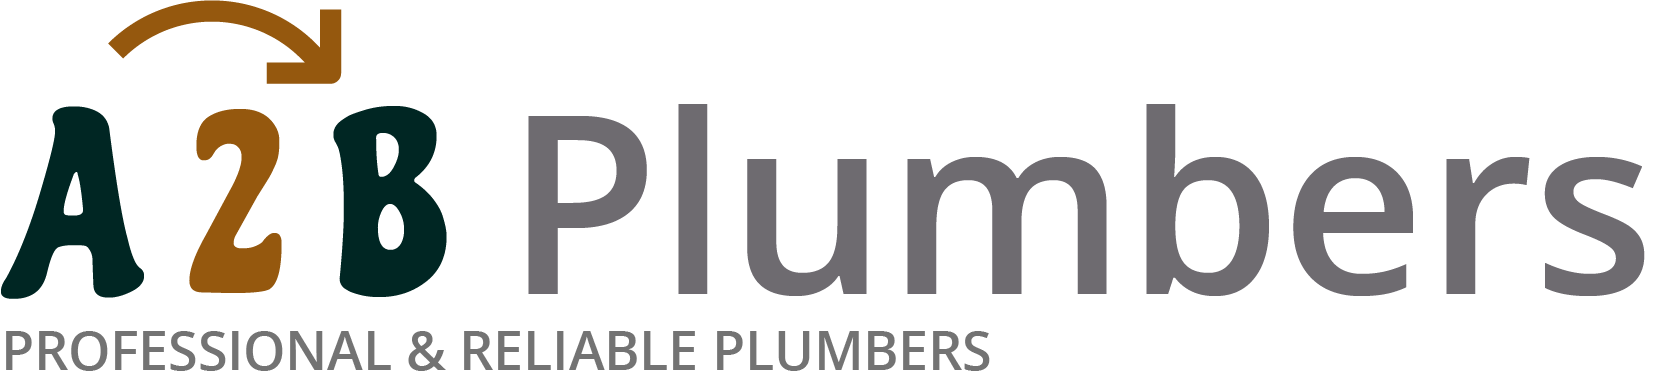 If you need a boiler installed, a radiator repaired or a leaking tap fixed, call us now - we provide services for properties in Pembroke and the local area.